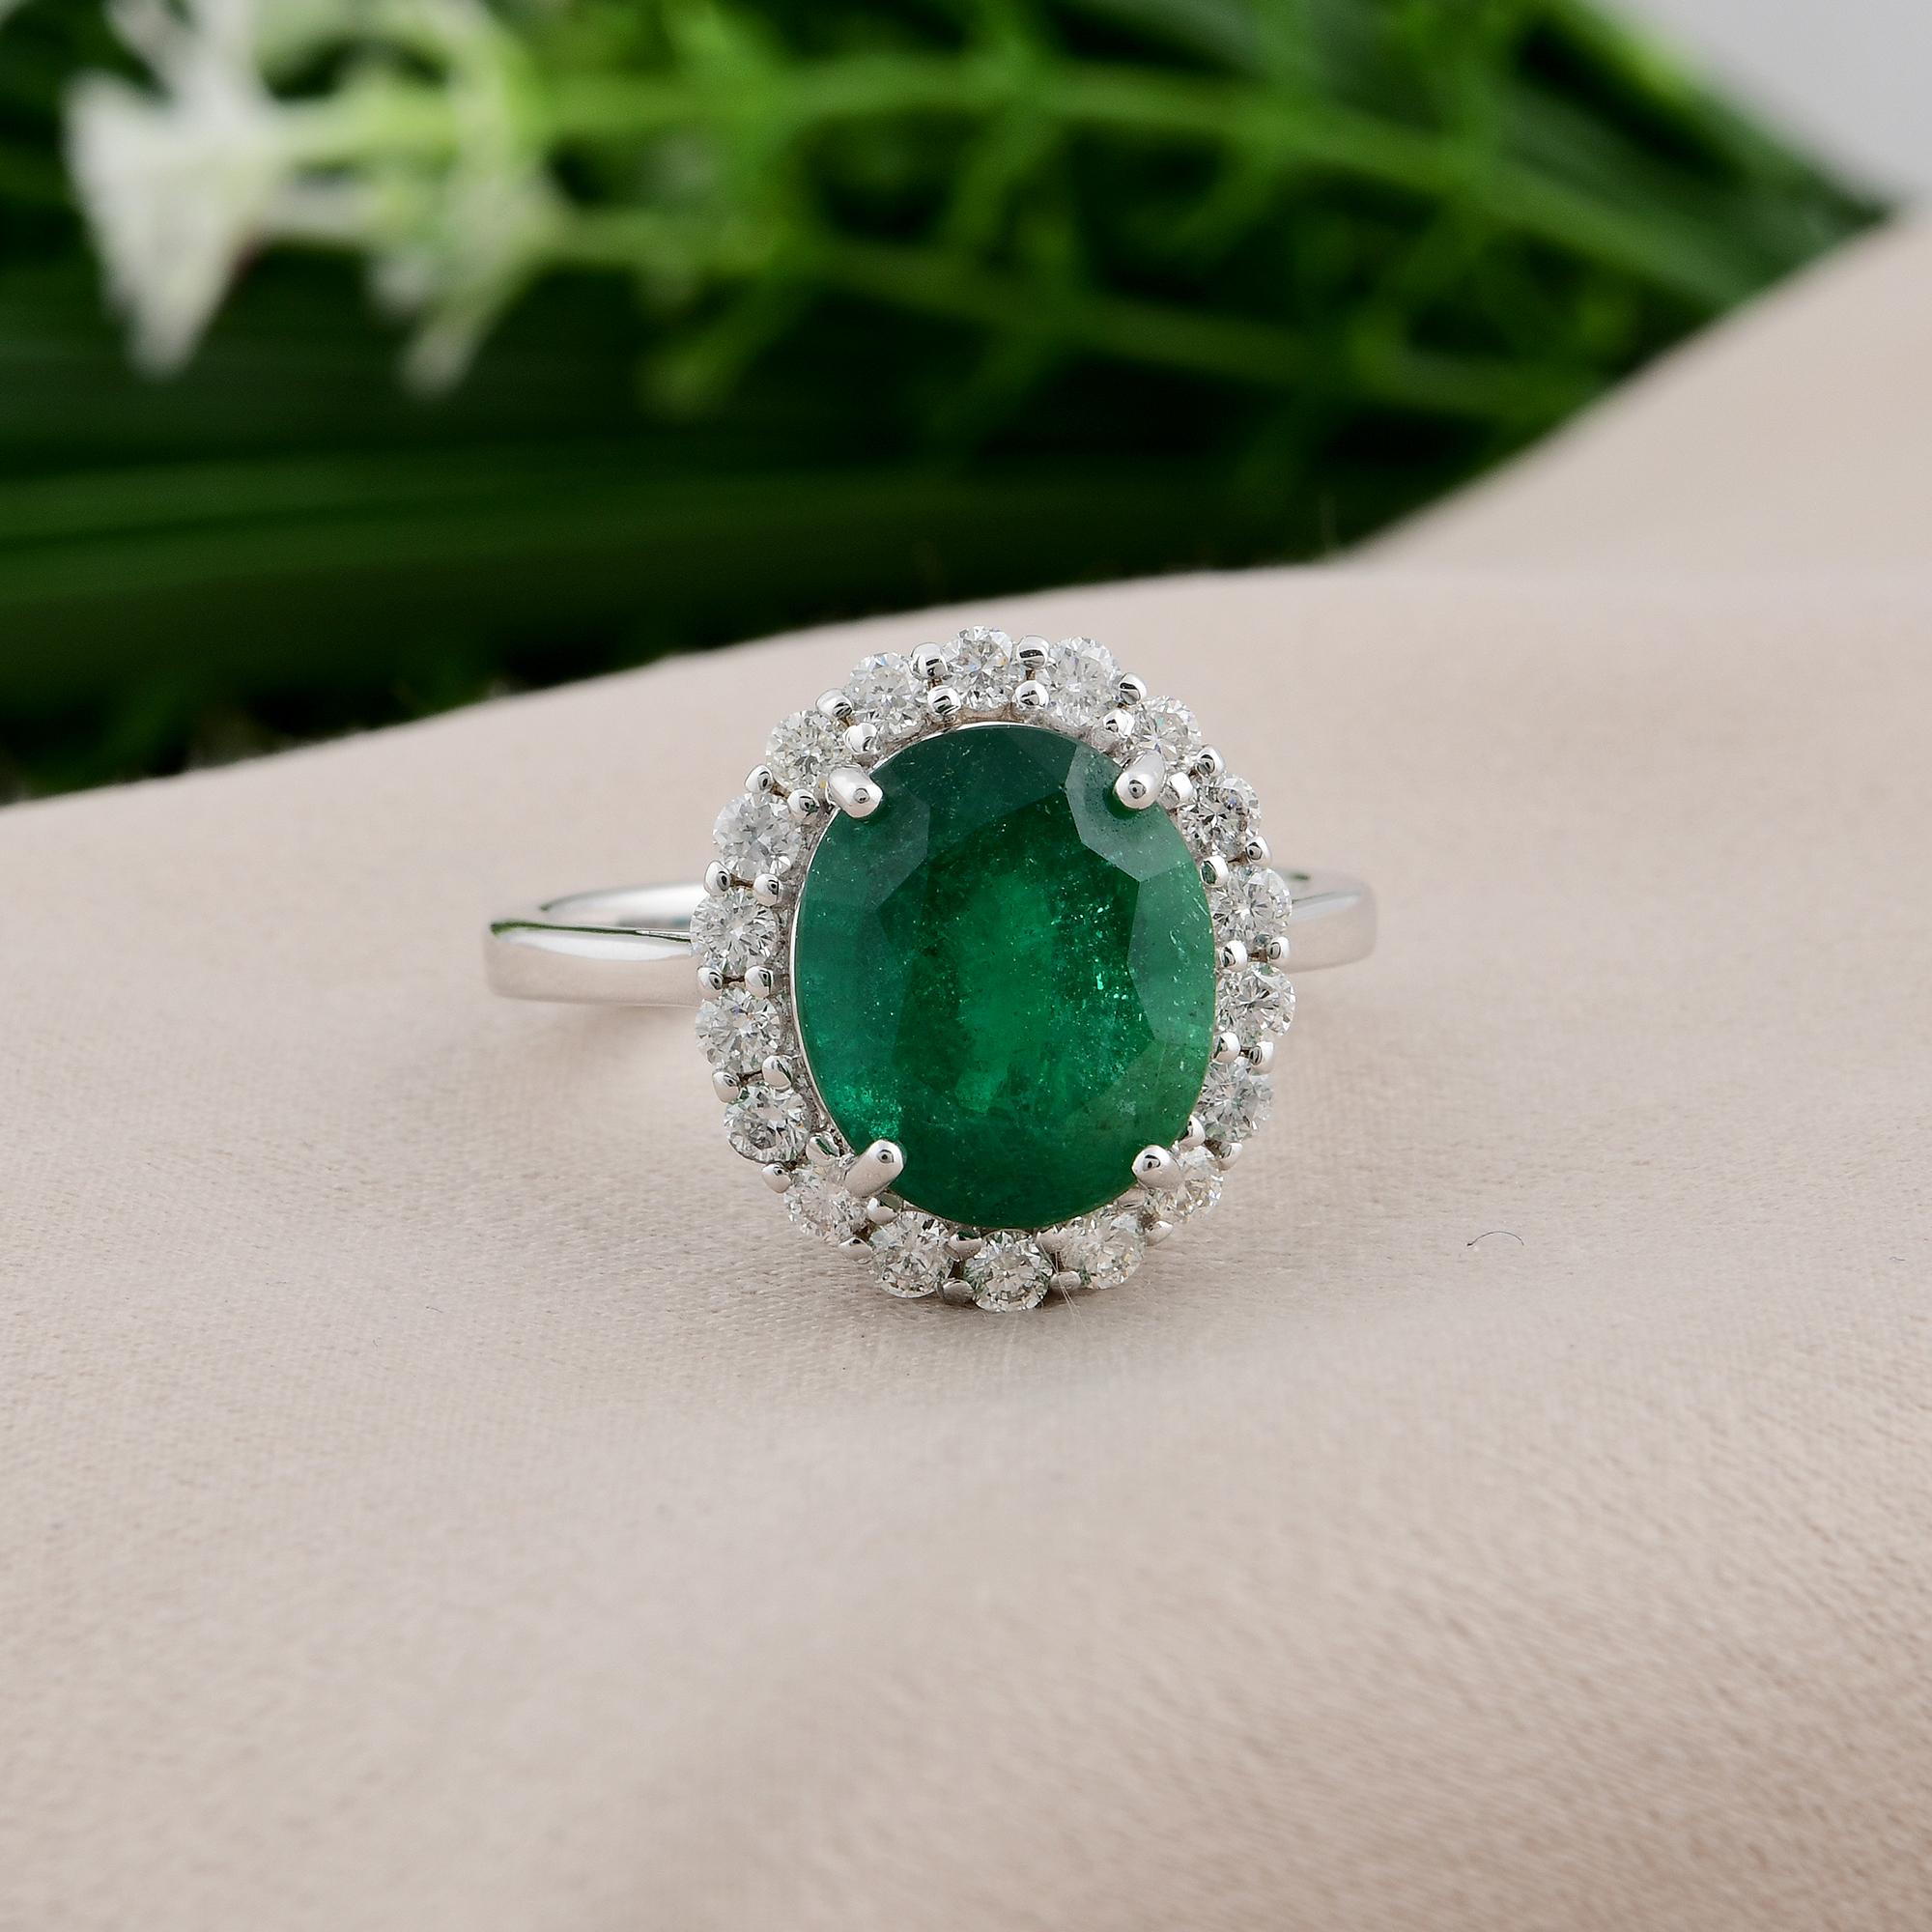 Oval Cut Oval Natural Emerald Gemstone Cocktail Ring Diamond 18 Karat White Gold Jewelry For Sale